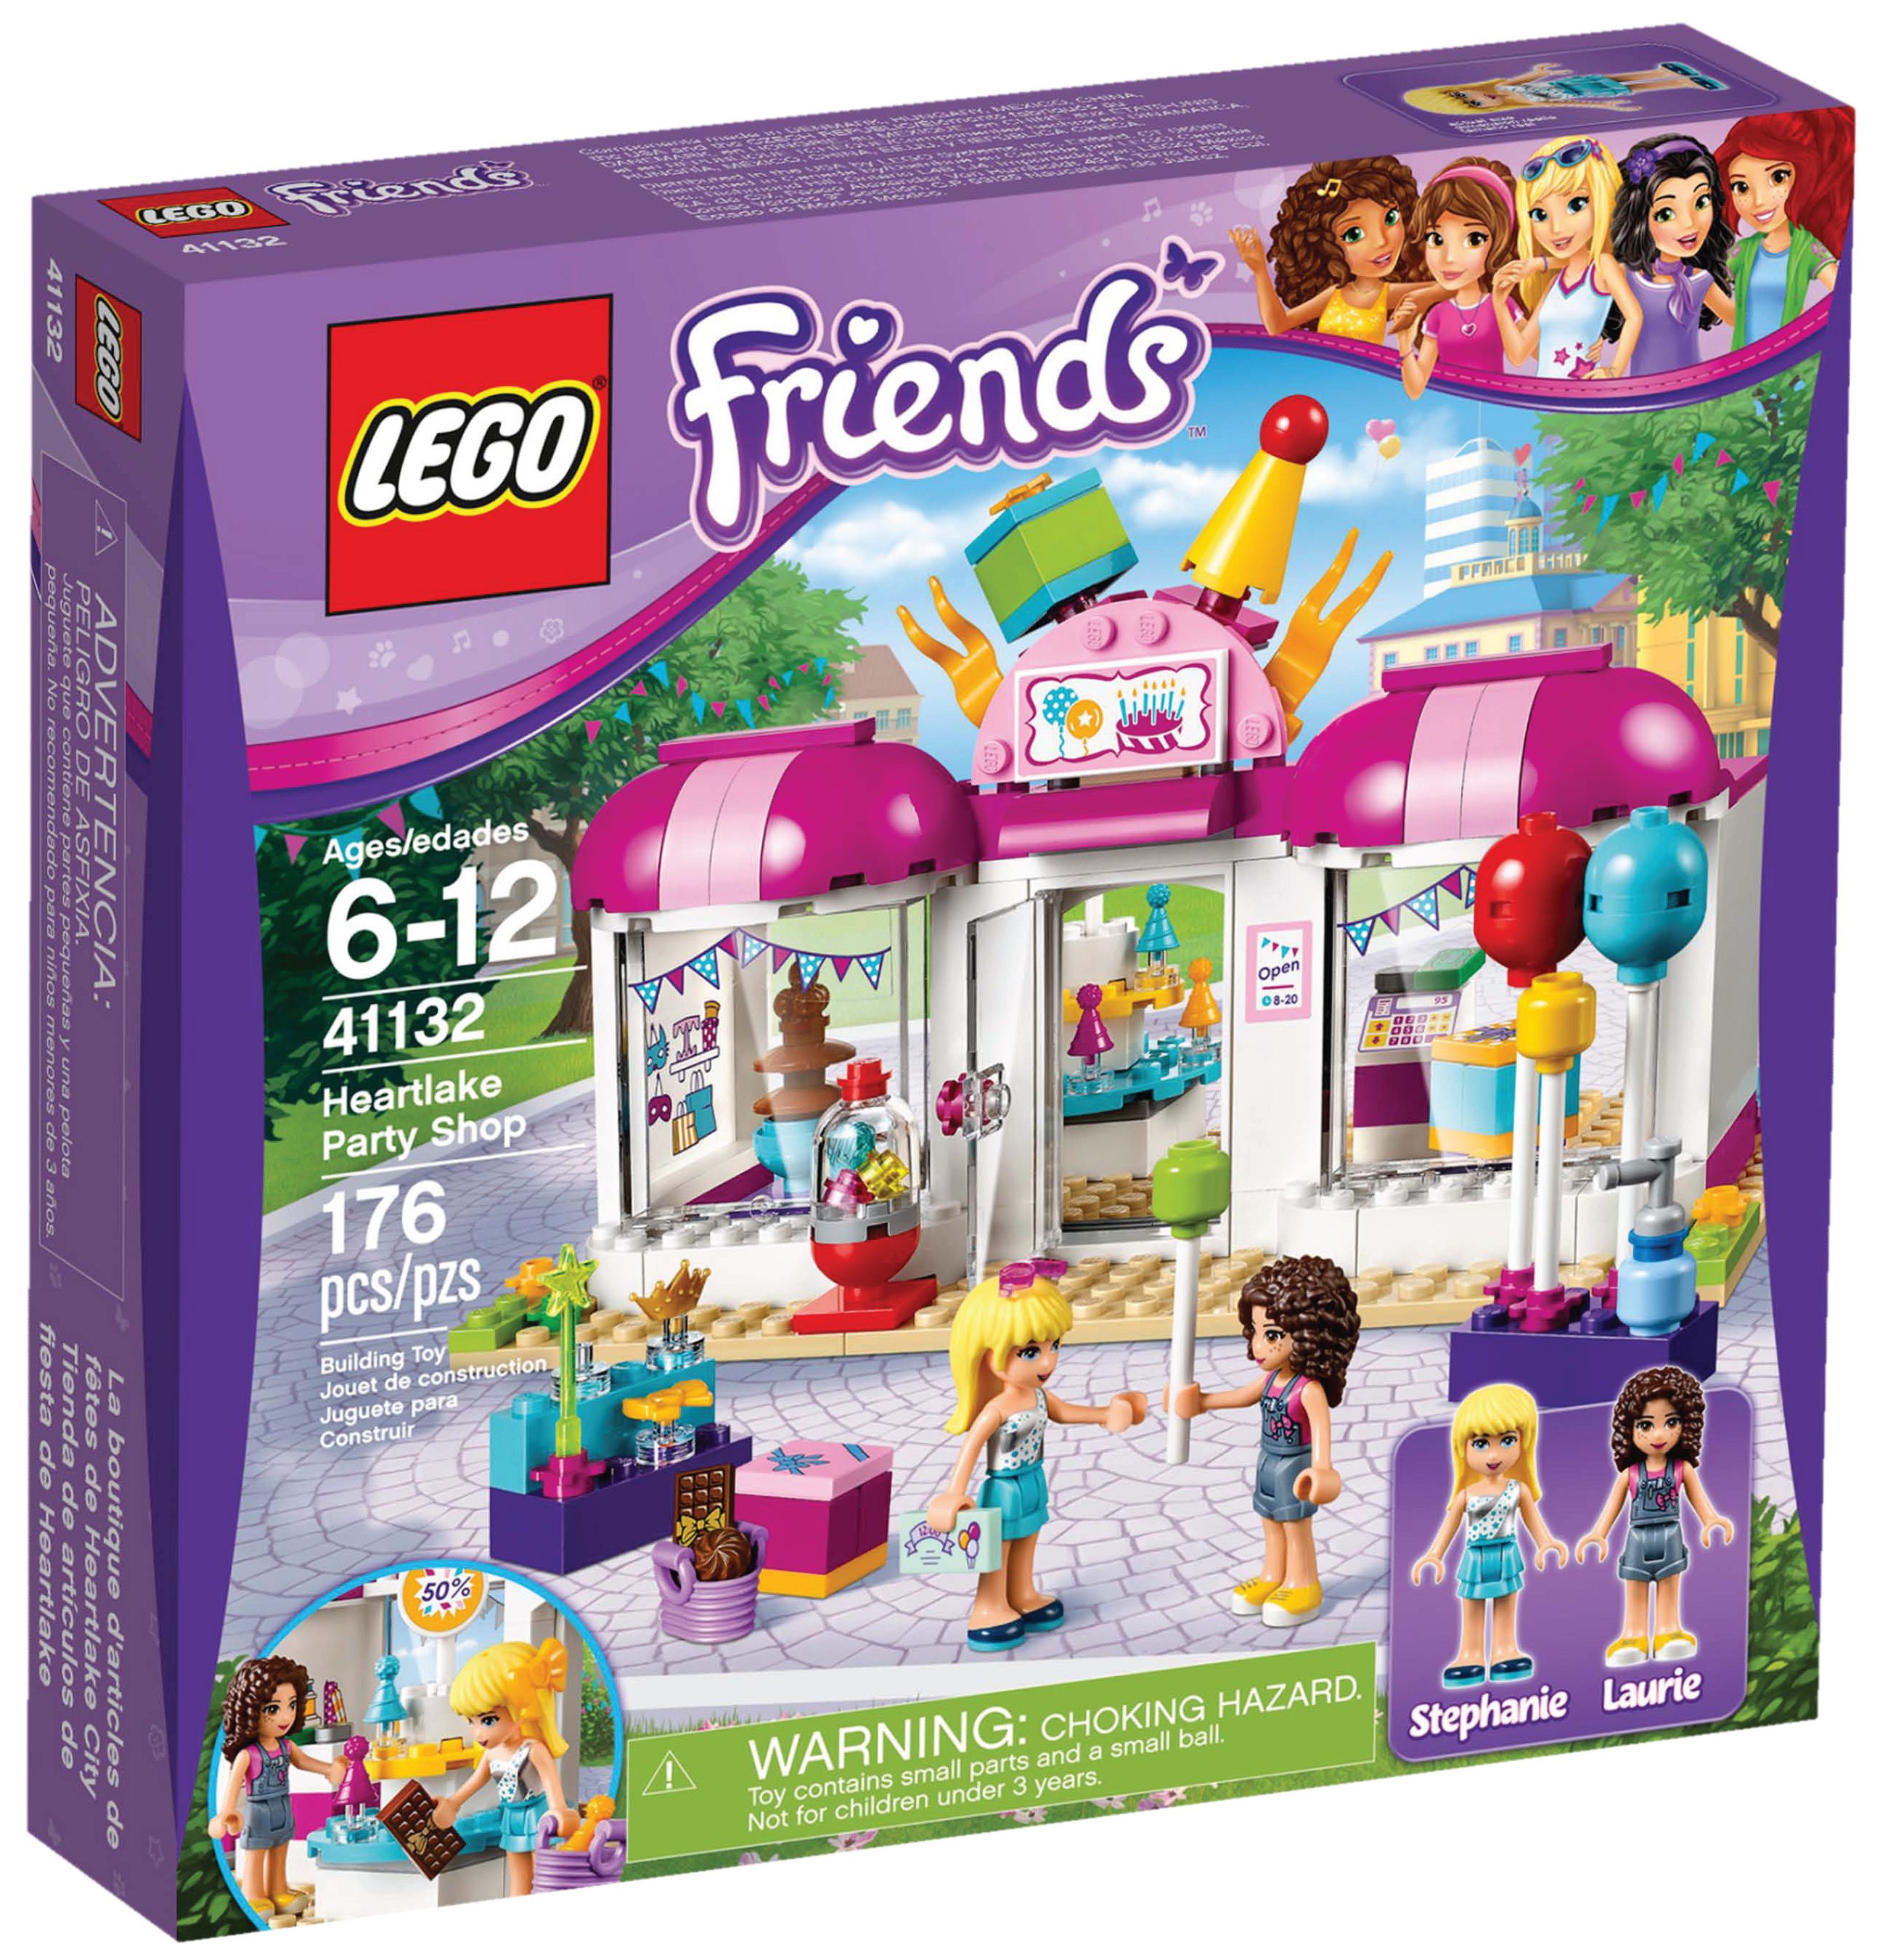 Take a Look At The Official Images of LEGO Friends 